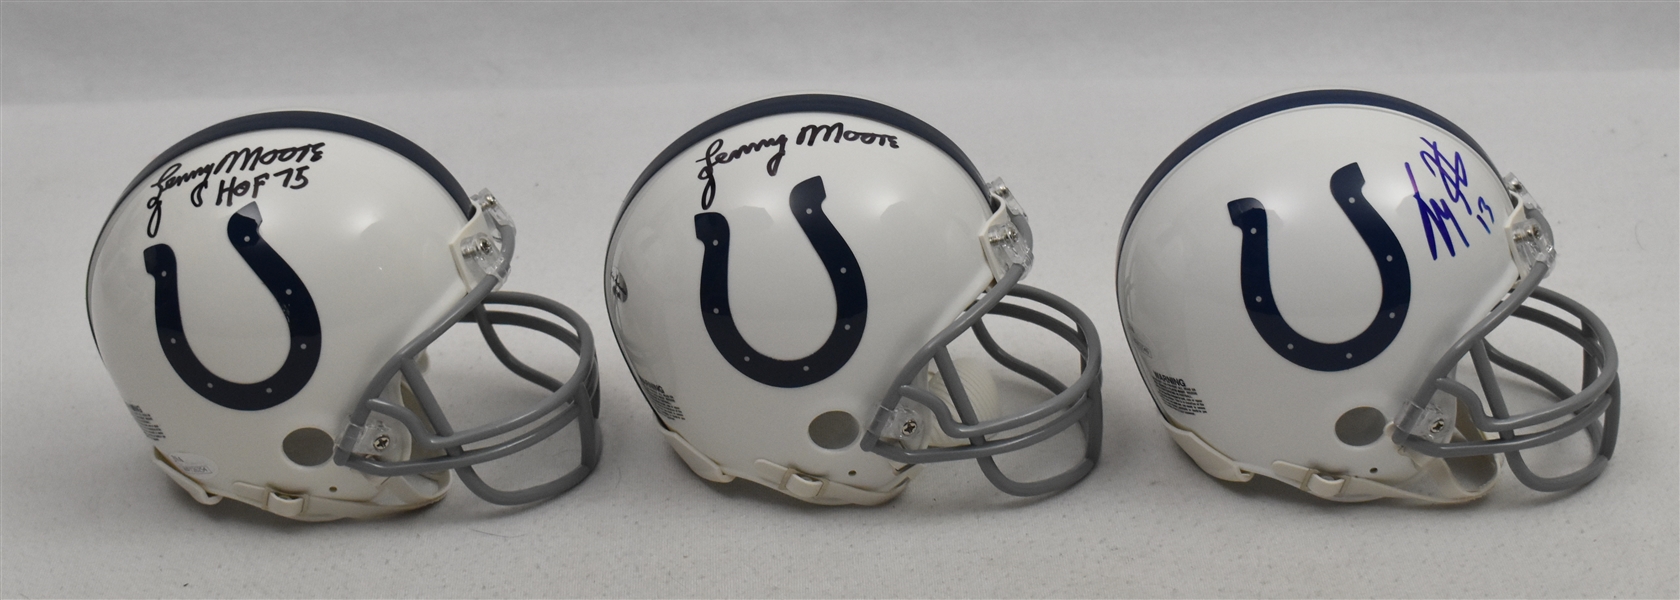 Lenny Moore & TY Hilton Lot of 3 Autographed Indianapolis Colts Mini Helmets